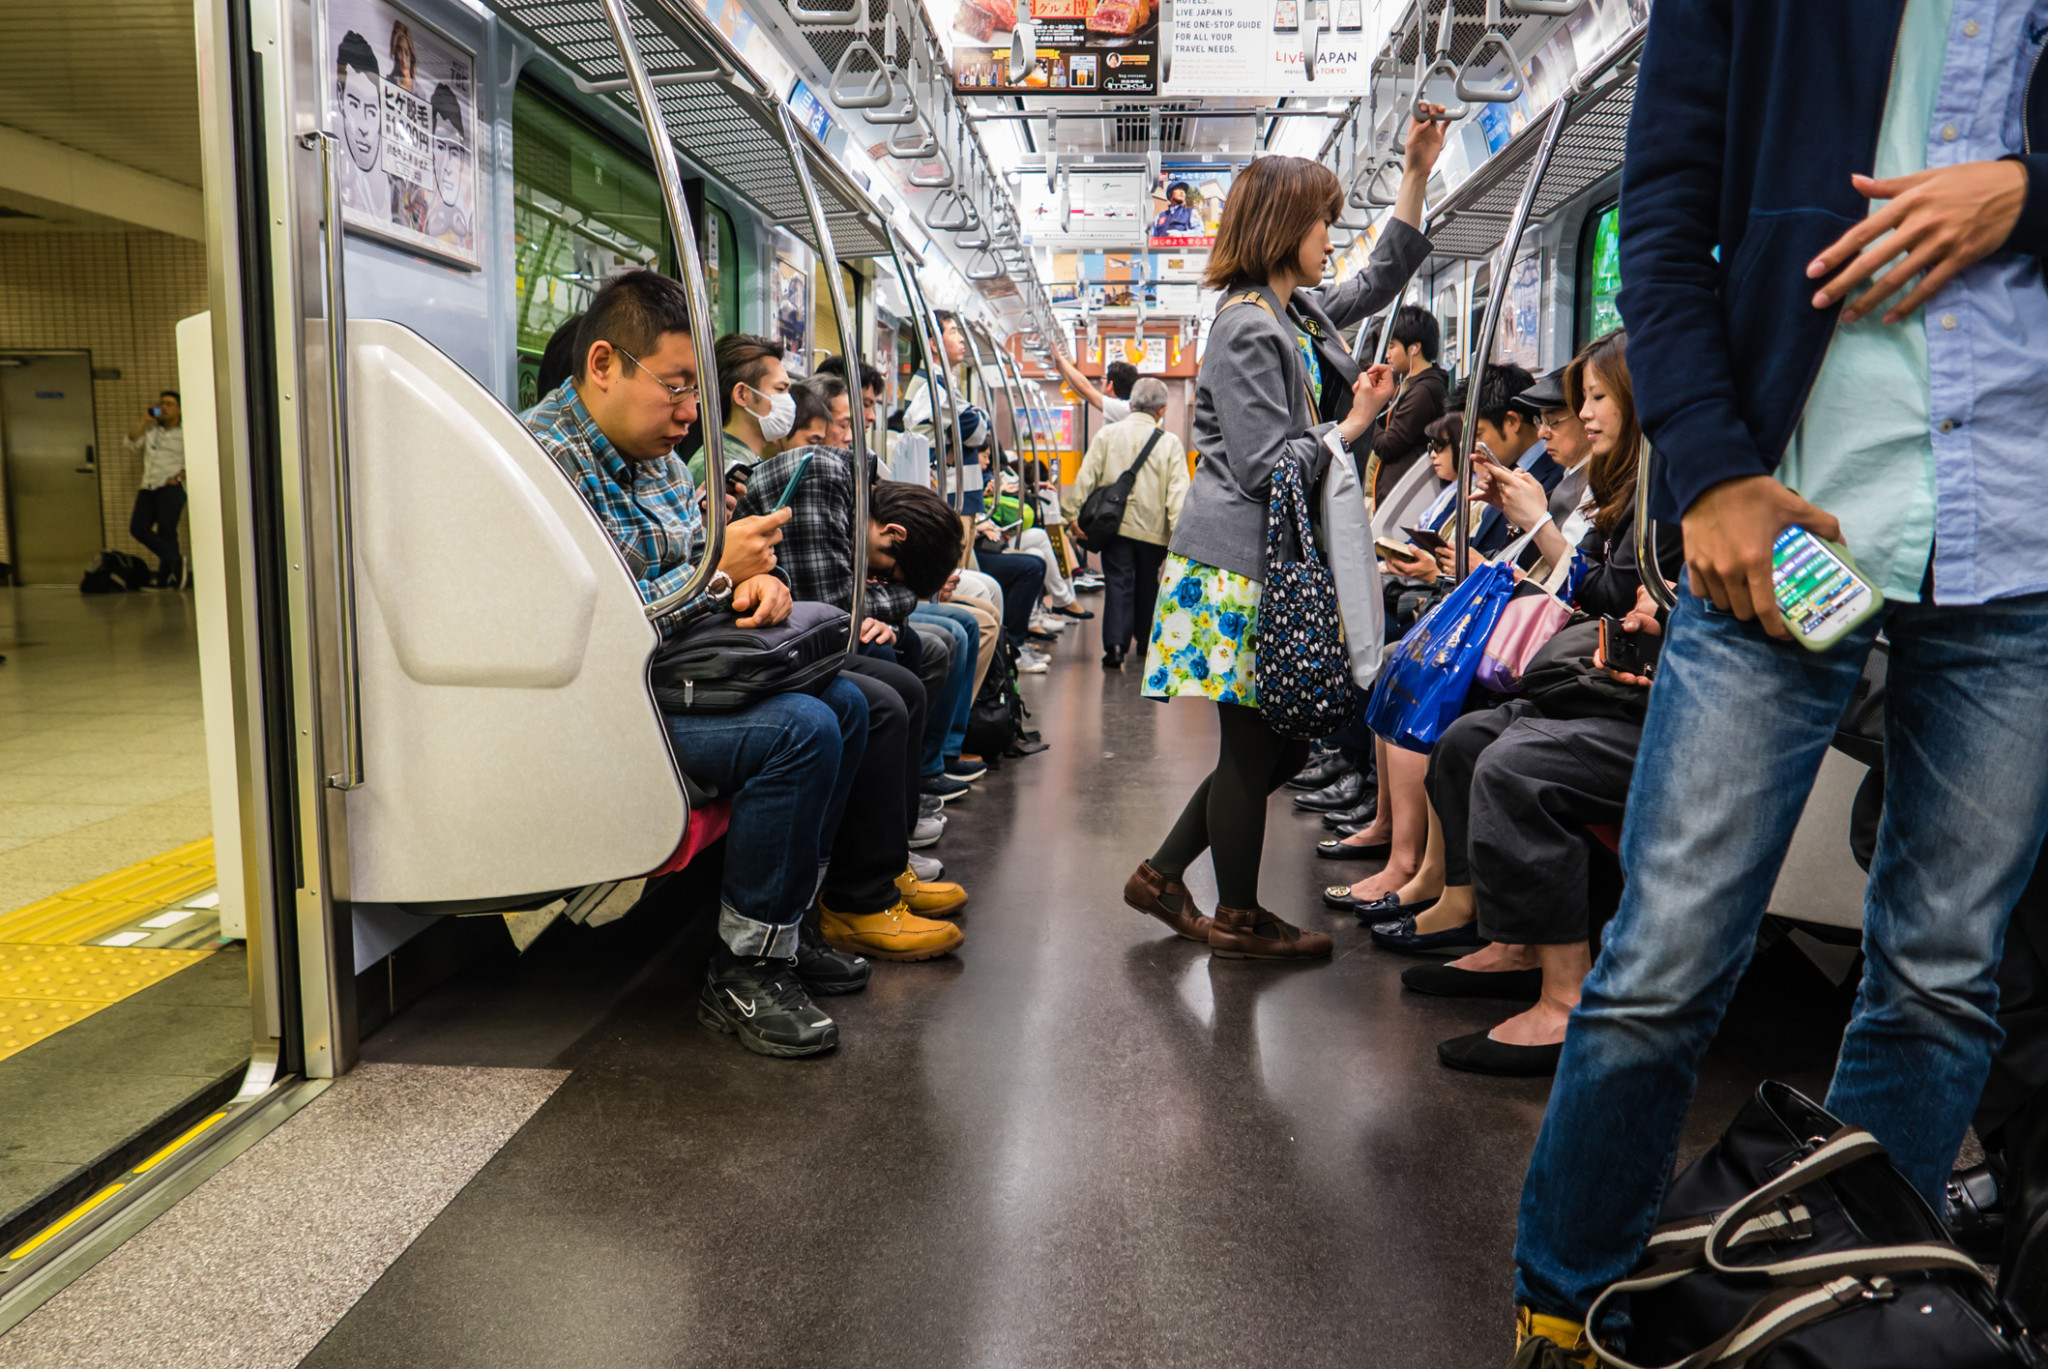 The media will be allowed to use public transport during Tokyo 2020 after all - but only after they have spent 14 days in Japan ©Getty Images